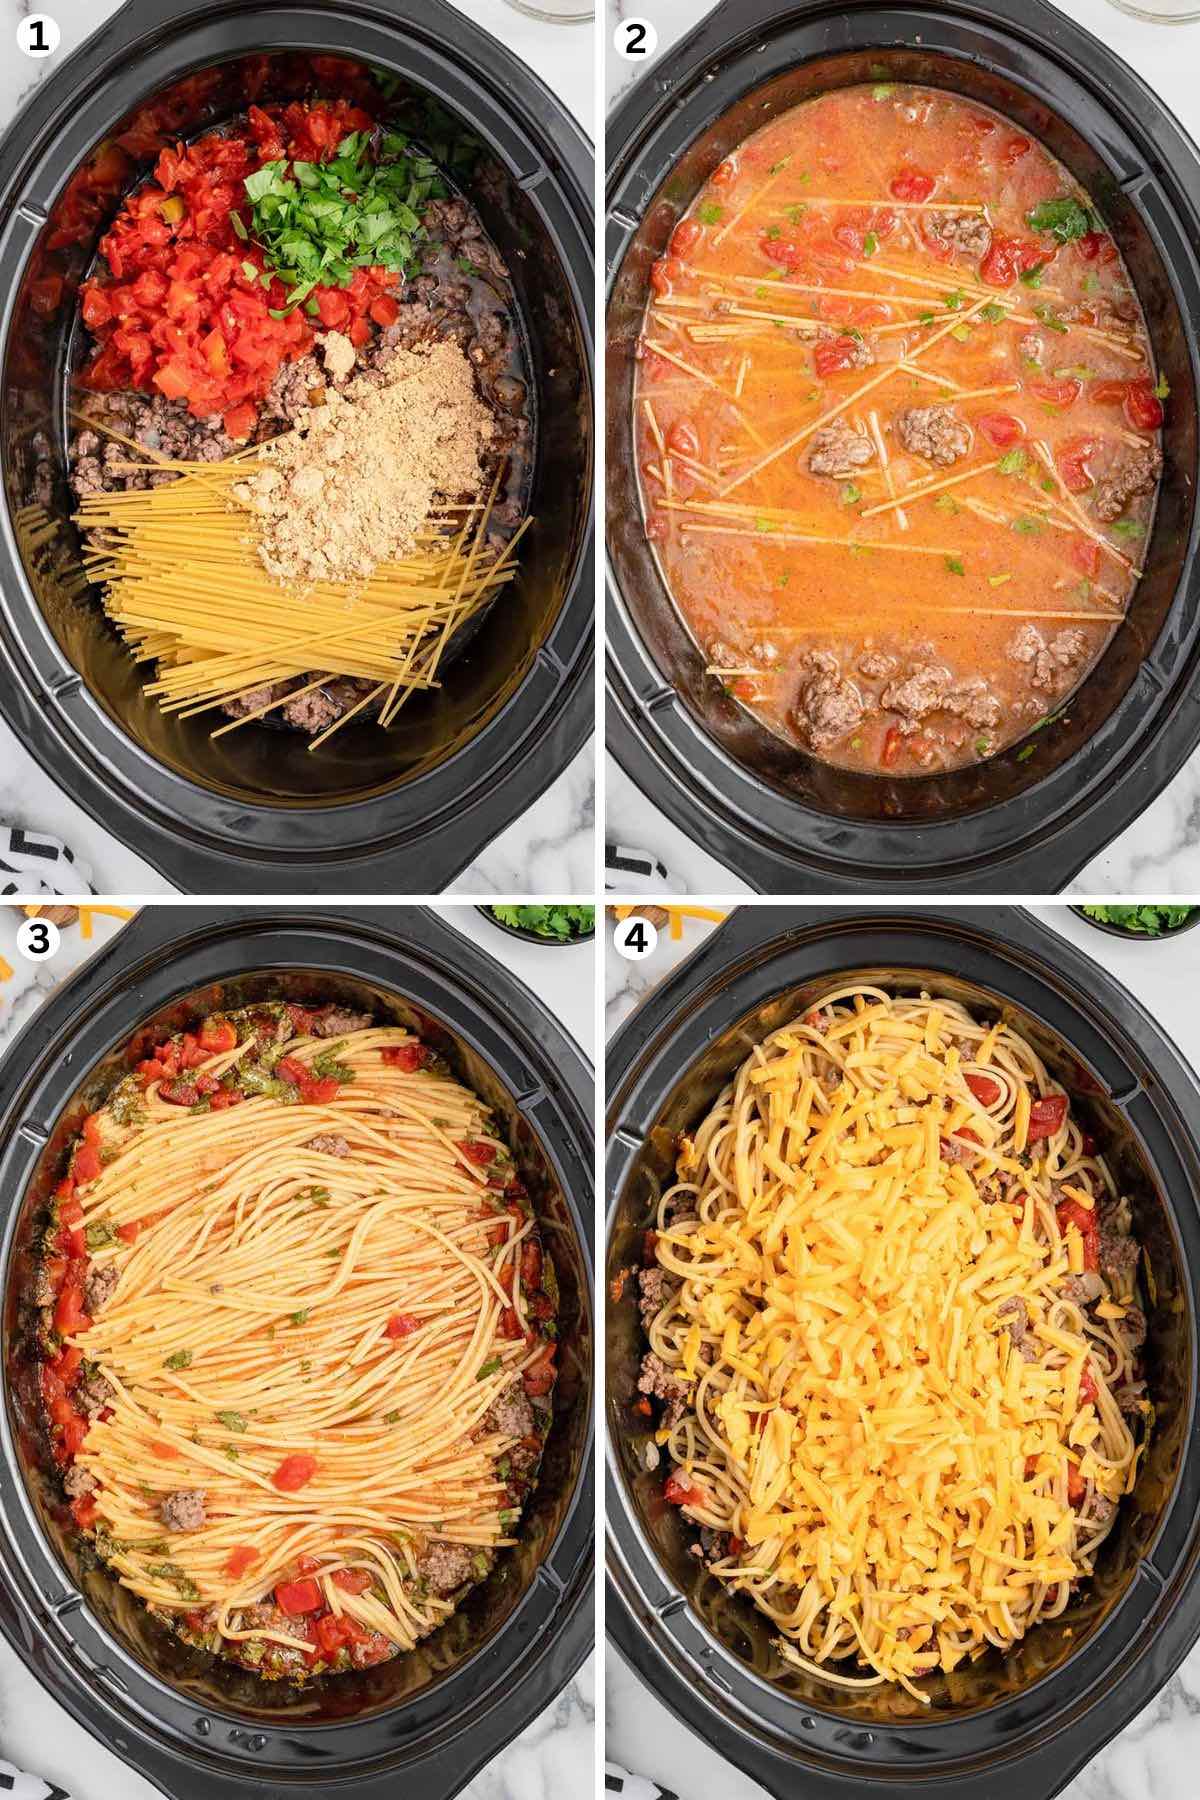 Put the the ingredients in the slow cooker. Add the broth and water. cooked taco spaghetti in slow cooker. add shredded cheese on top of the spaghetti.